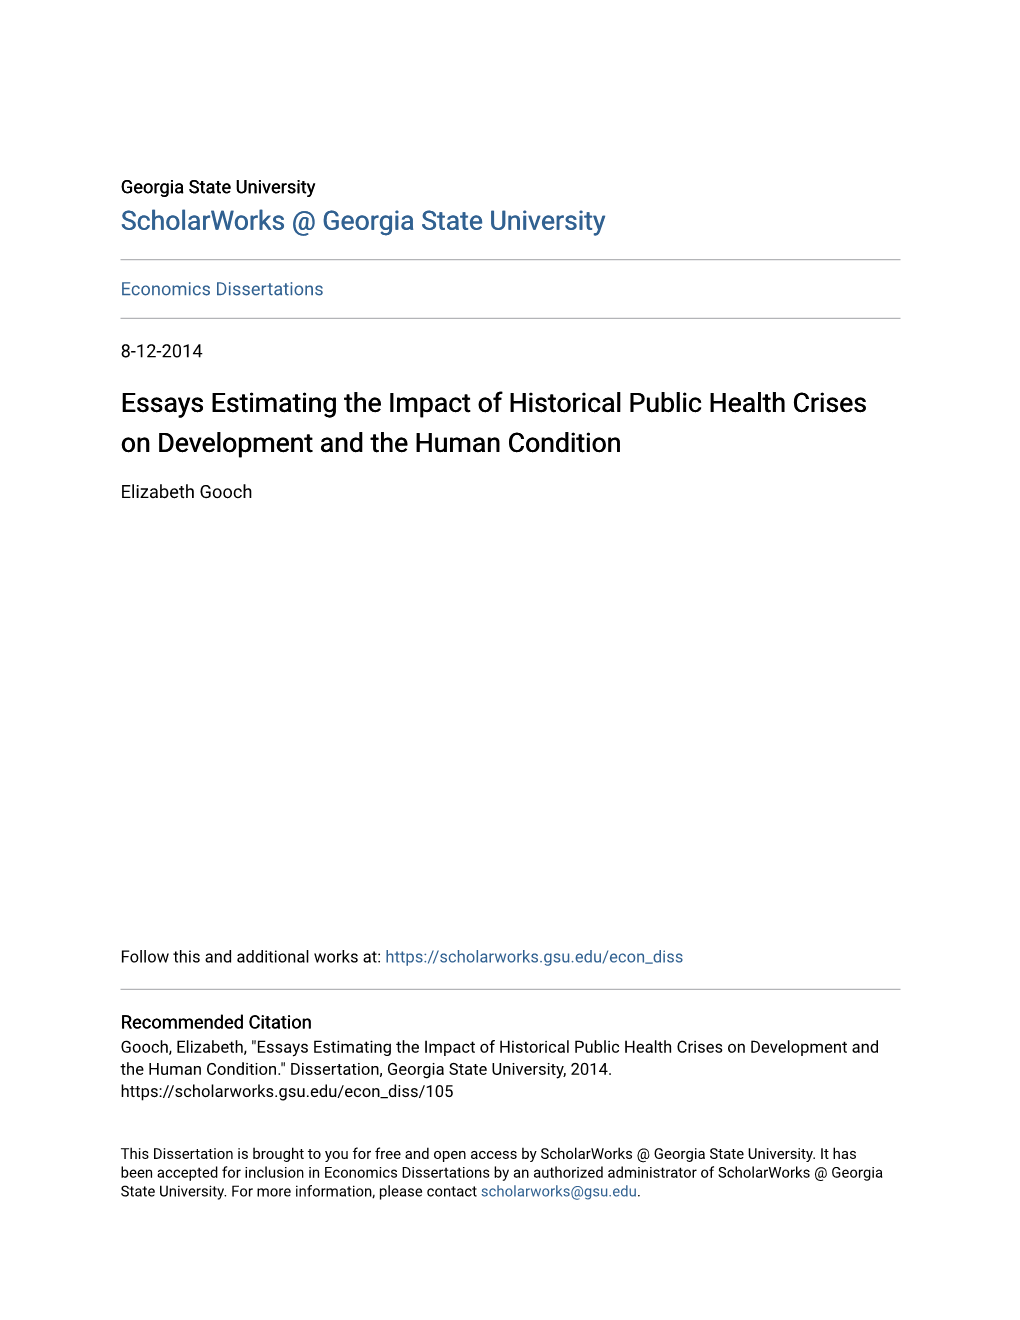 Essays Estimating the Impact of Historical Public Health Crises on Development and the Human Condition